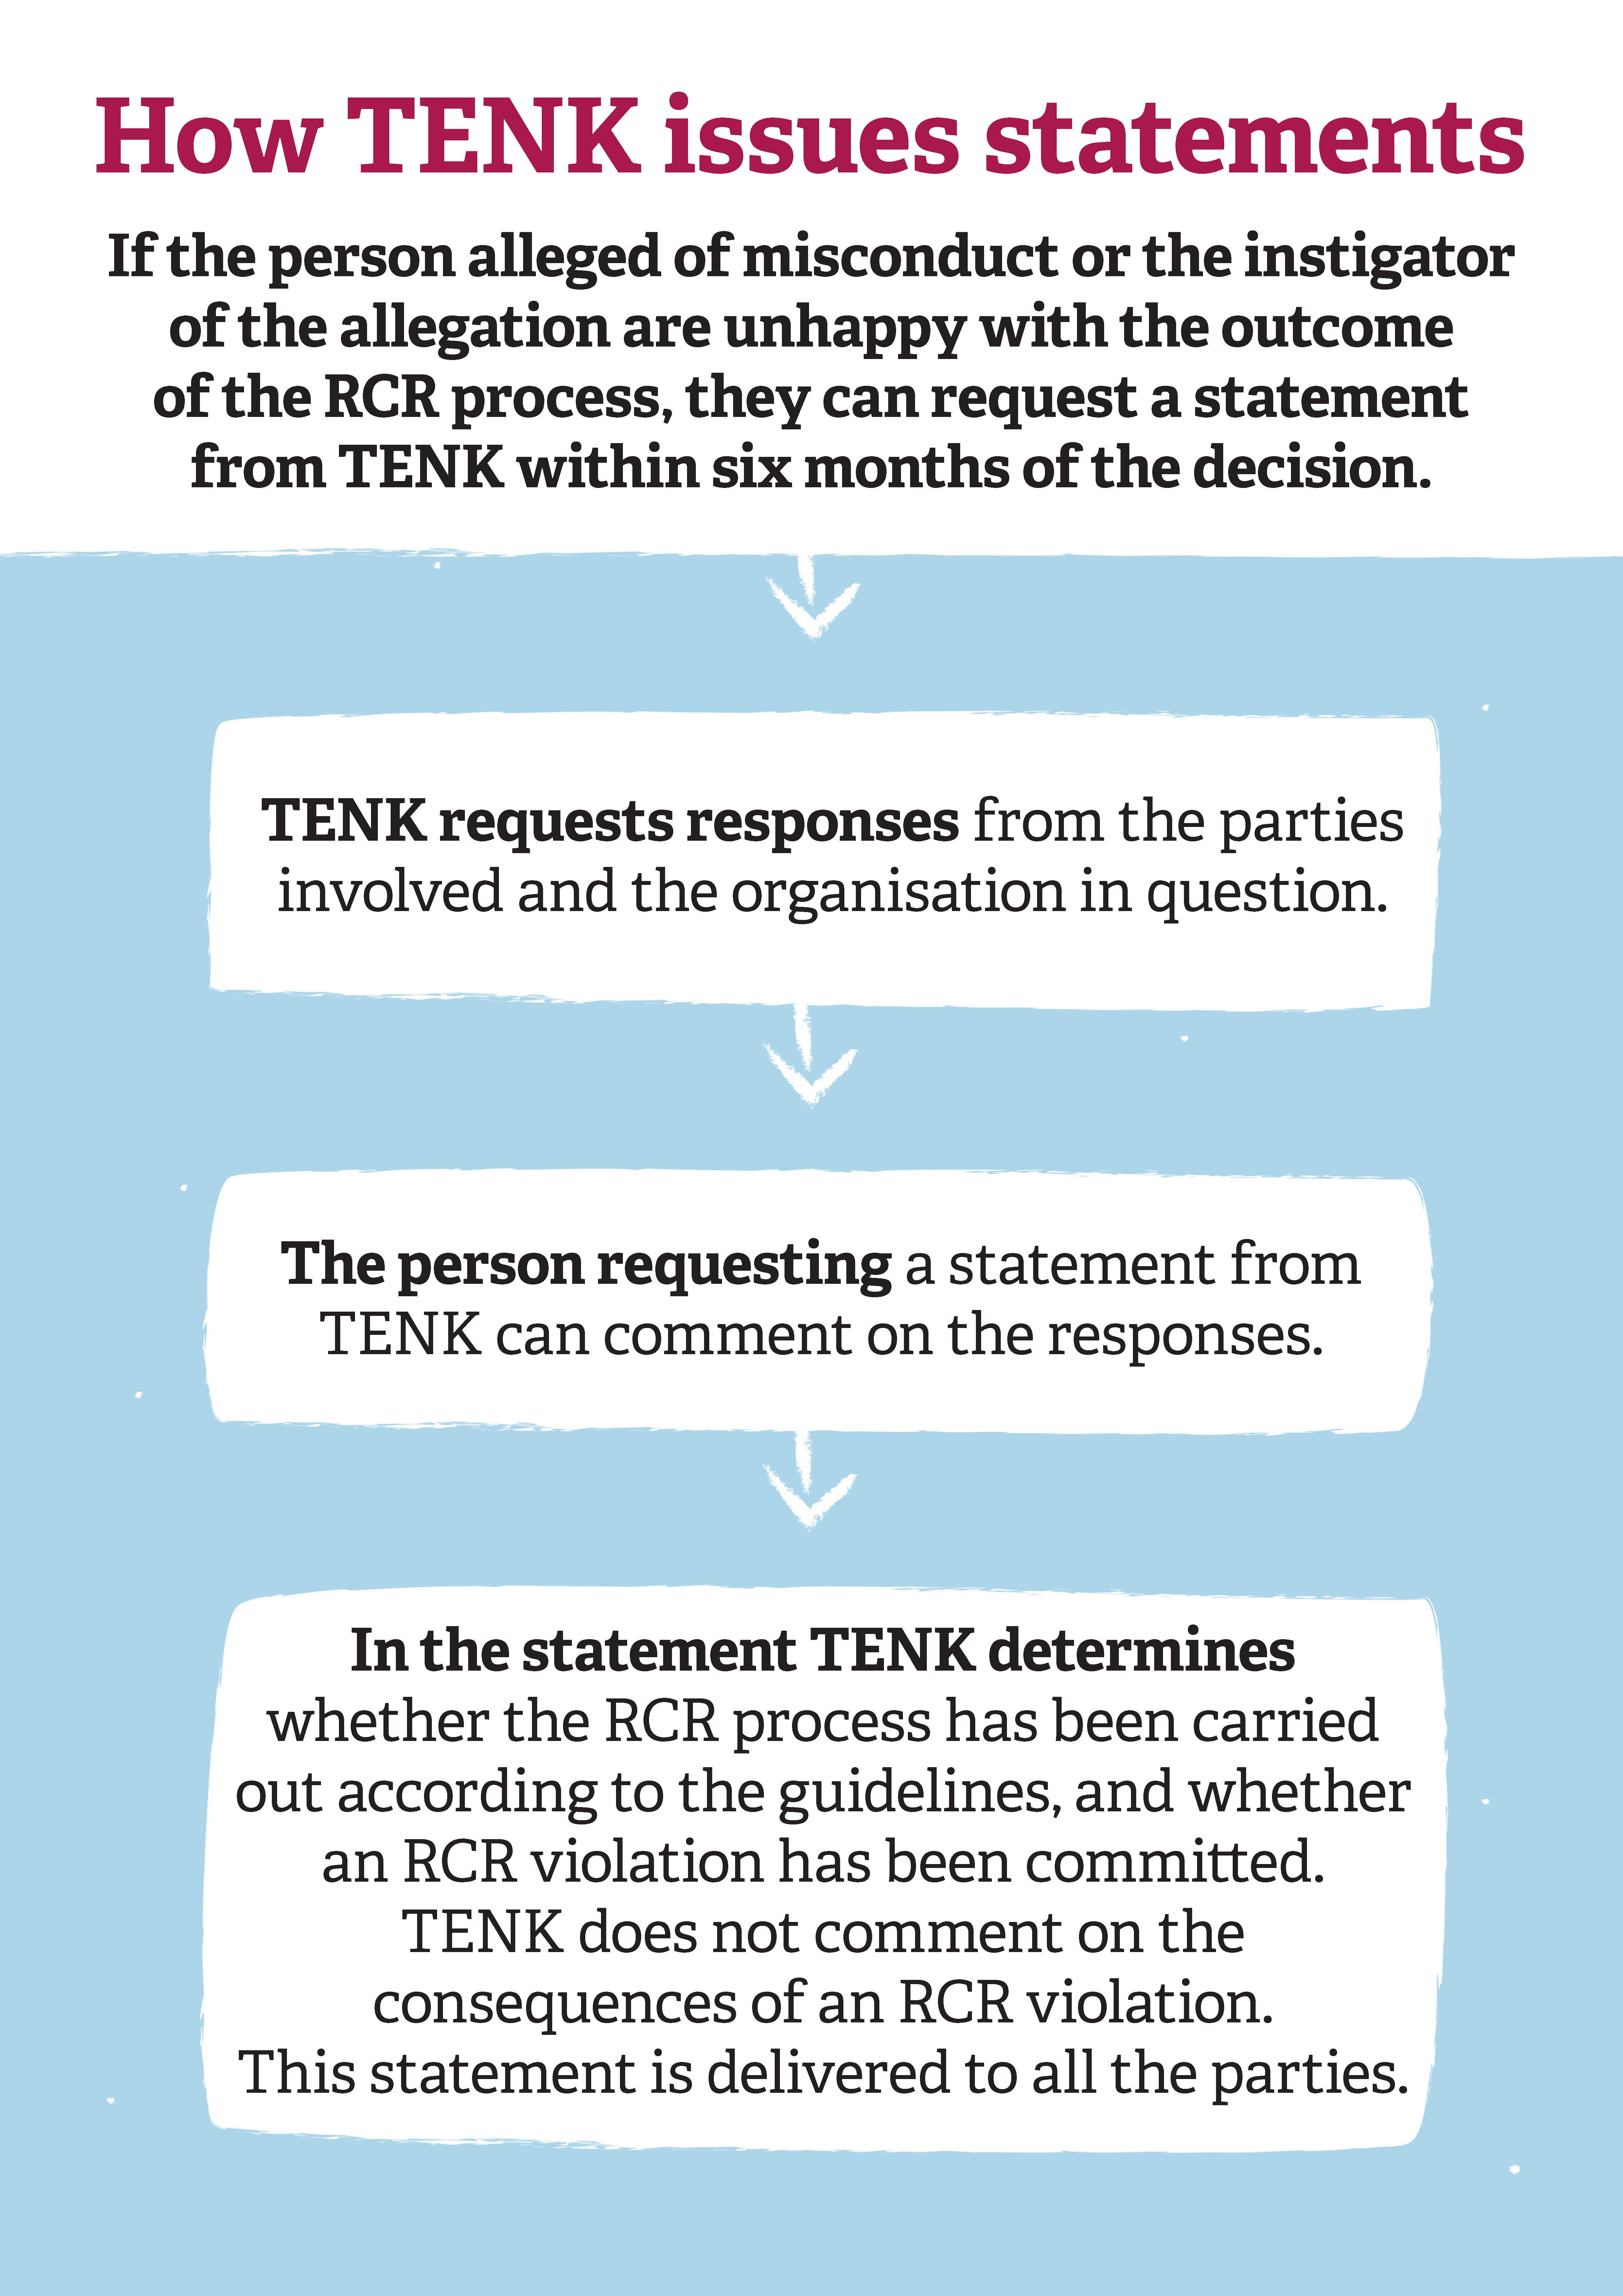 A shortened version of the TENK's statements' process described in the text.